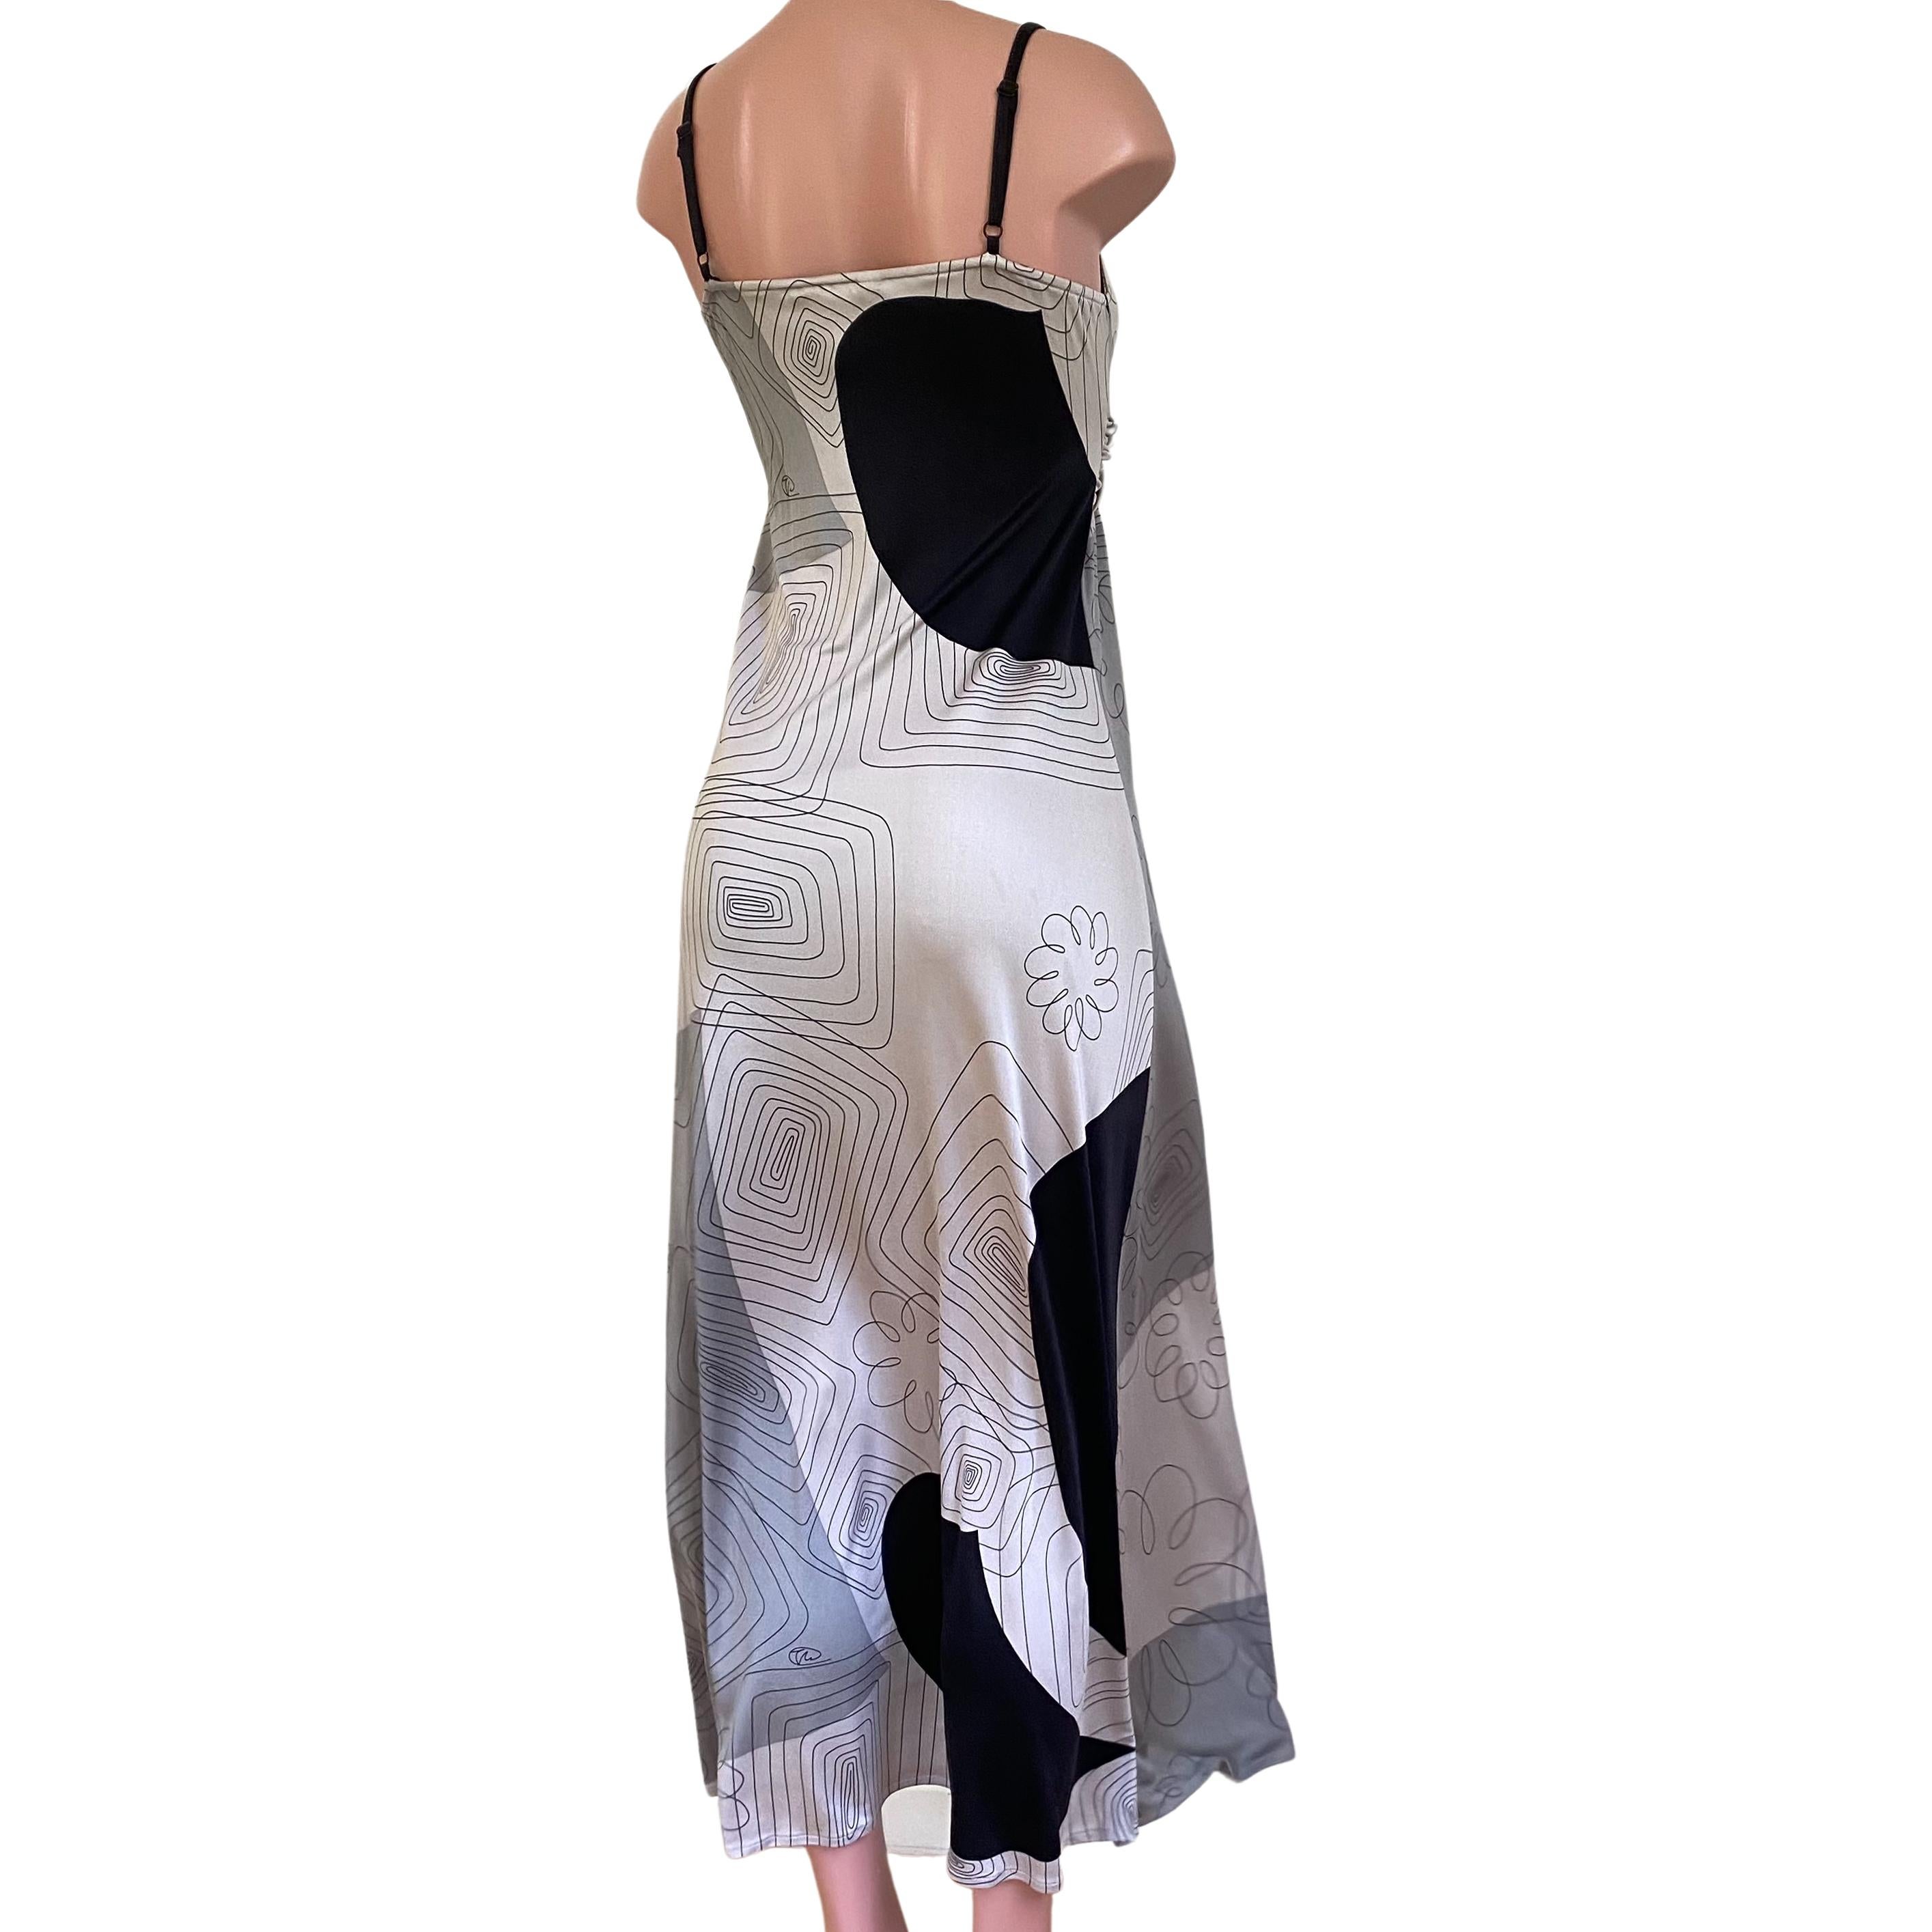 Cool, easy breezy twist front maxi cami dress with adjustable shoulder straps for a perfect, flattering fit.
Original freehand scribble print signed by Flora.
Approximately 58